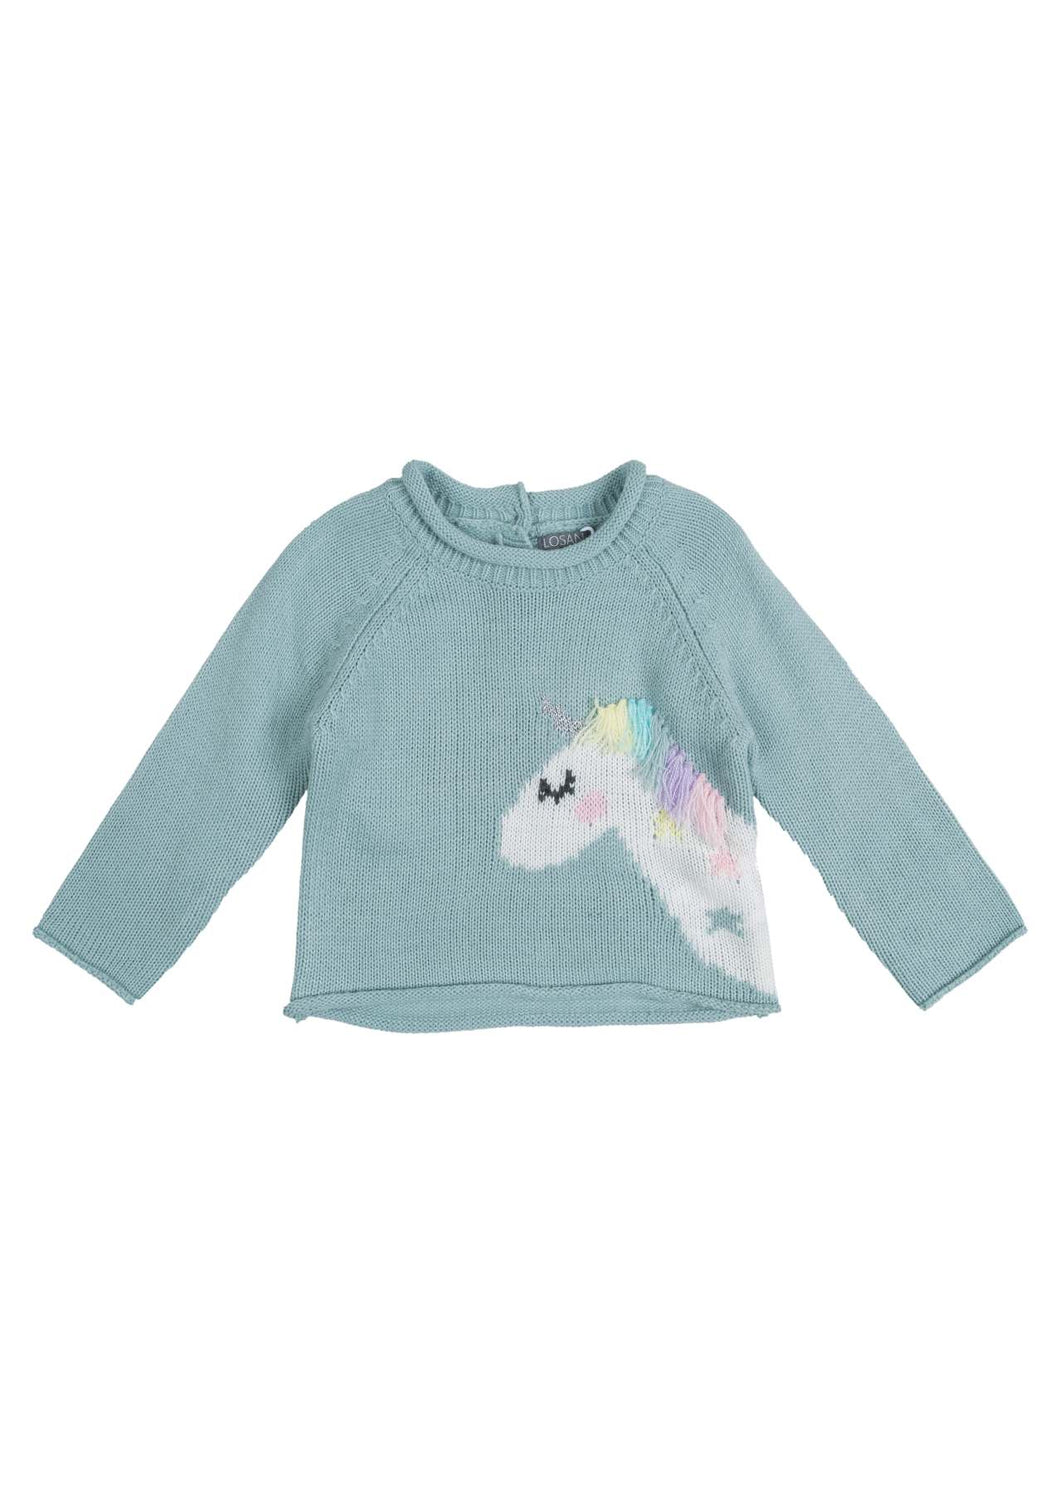 LOSAN <BR>
Baby Unicorm knited sweater <BR>
Jade <BR>